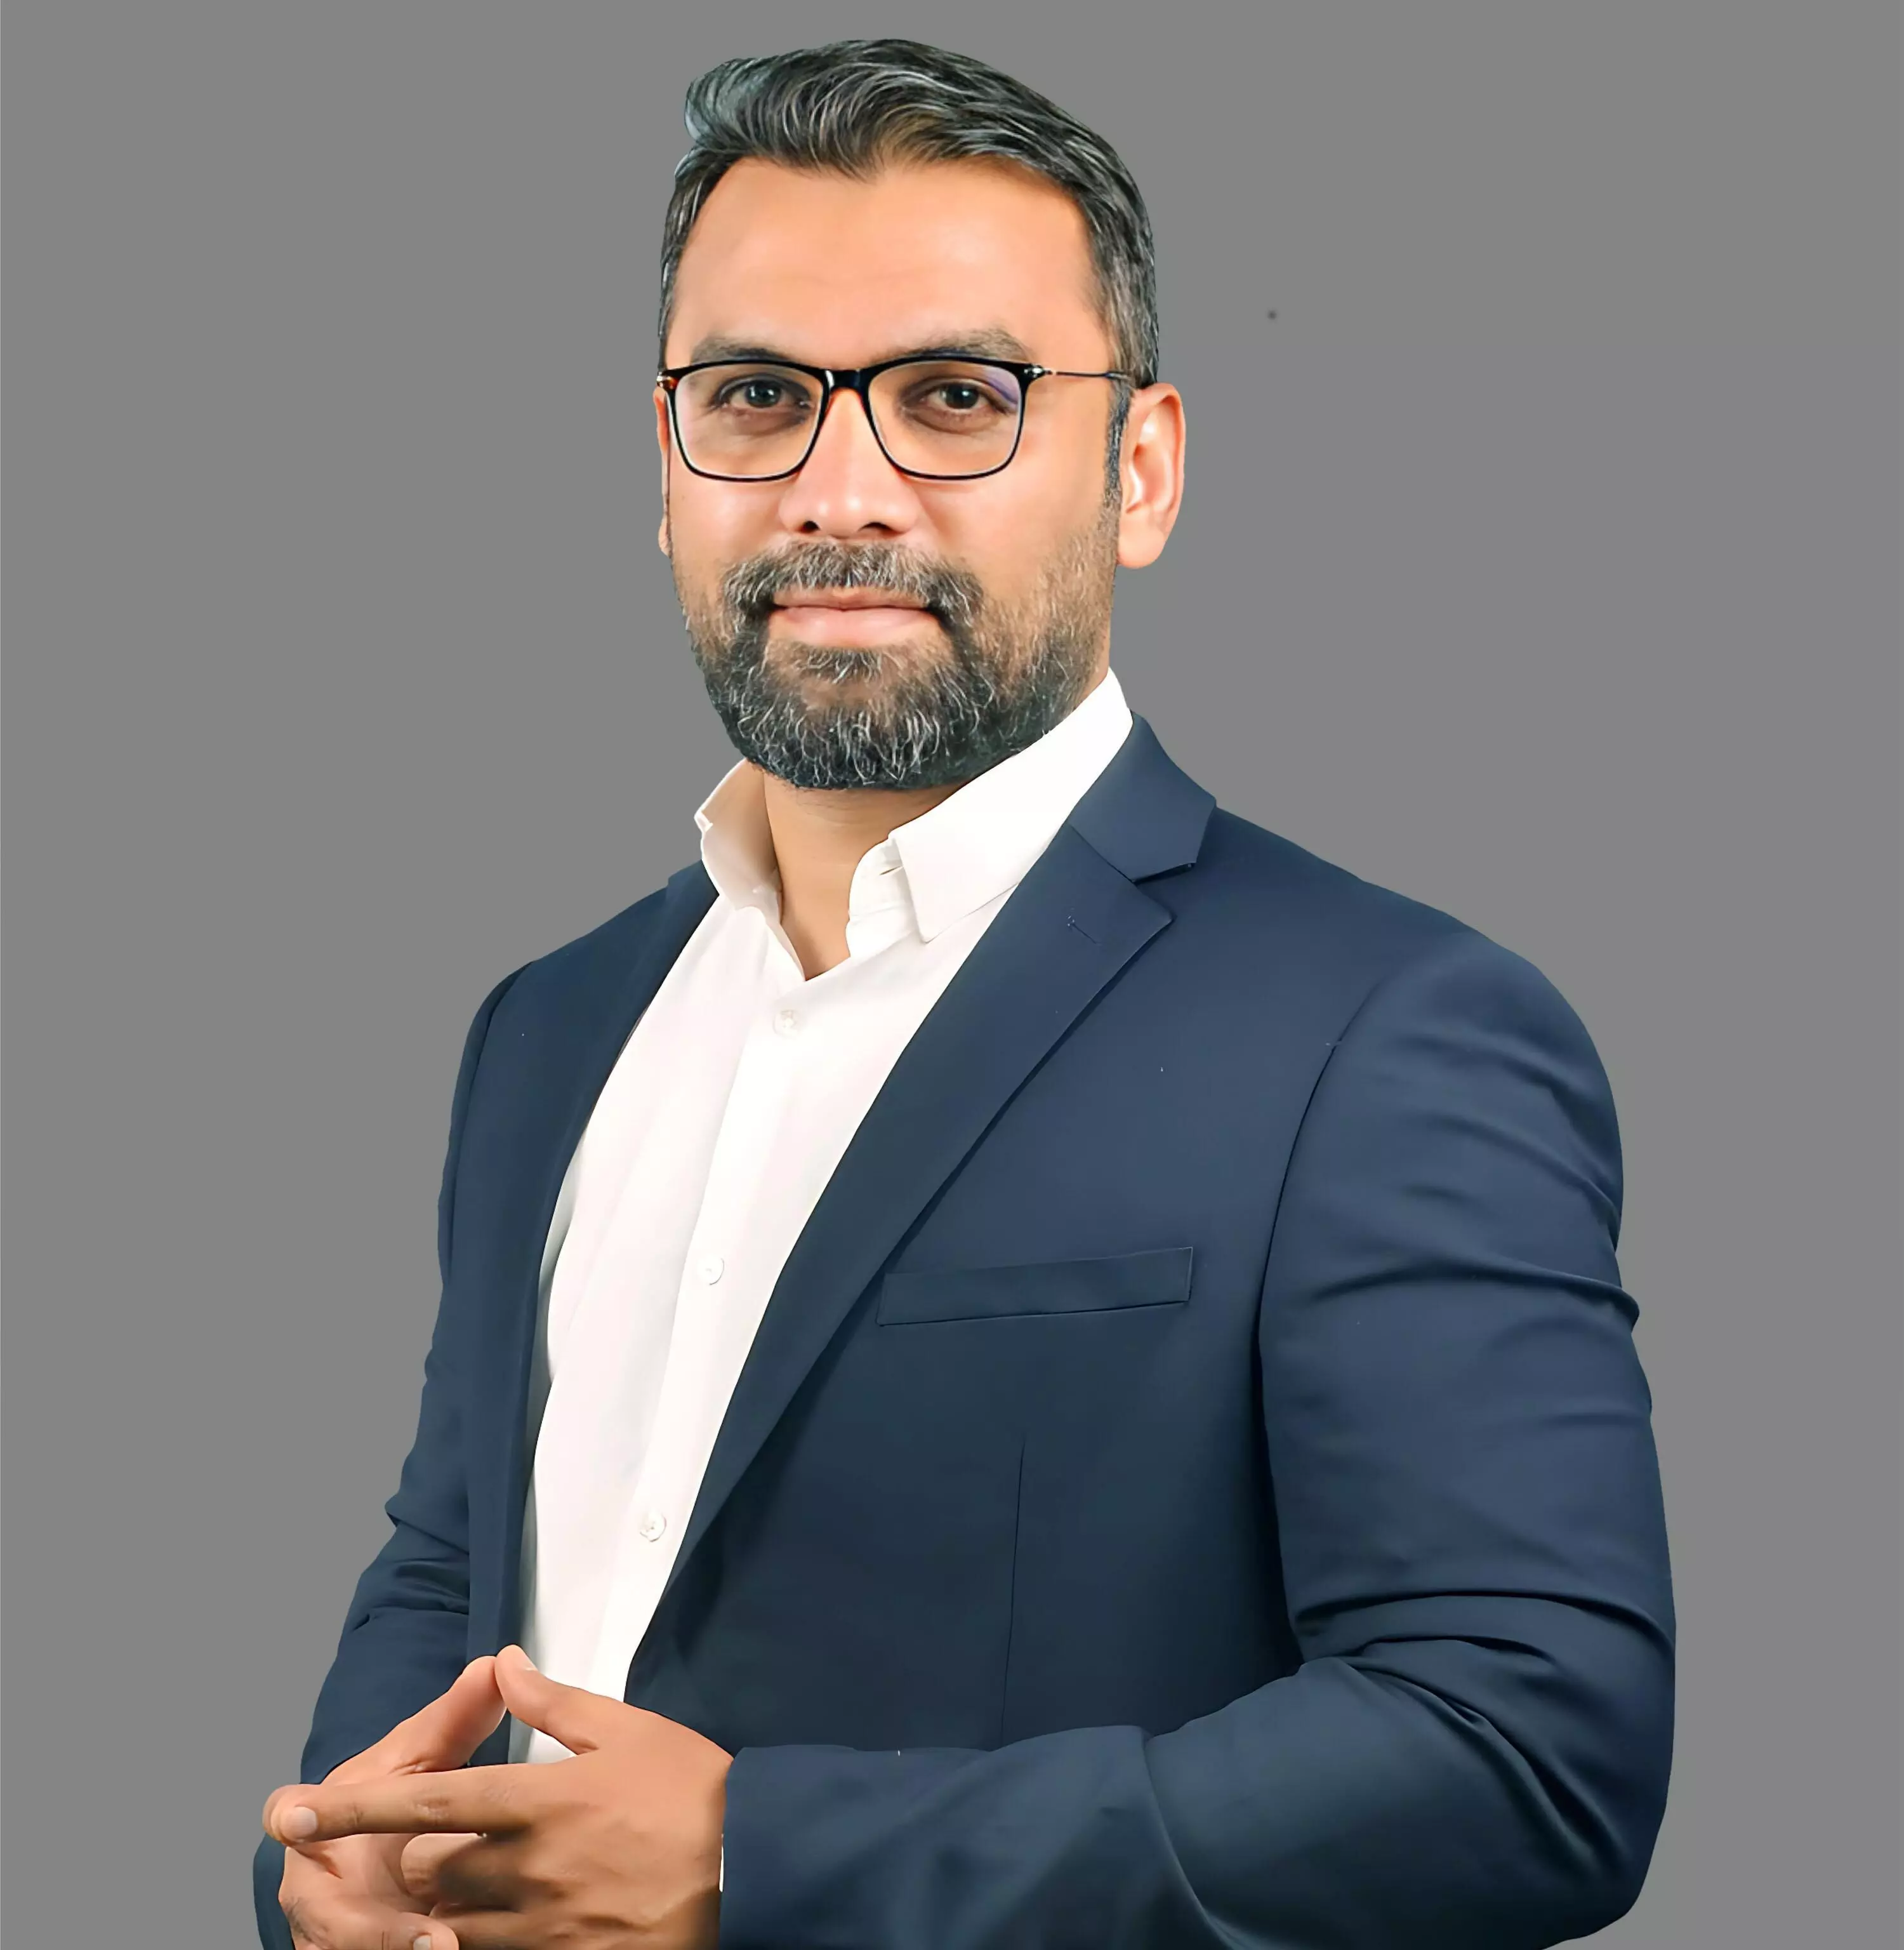 Decoding data dominance: Embark on journey with Muhammad Alfan in realm of analytics